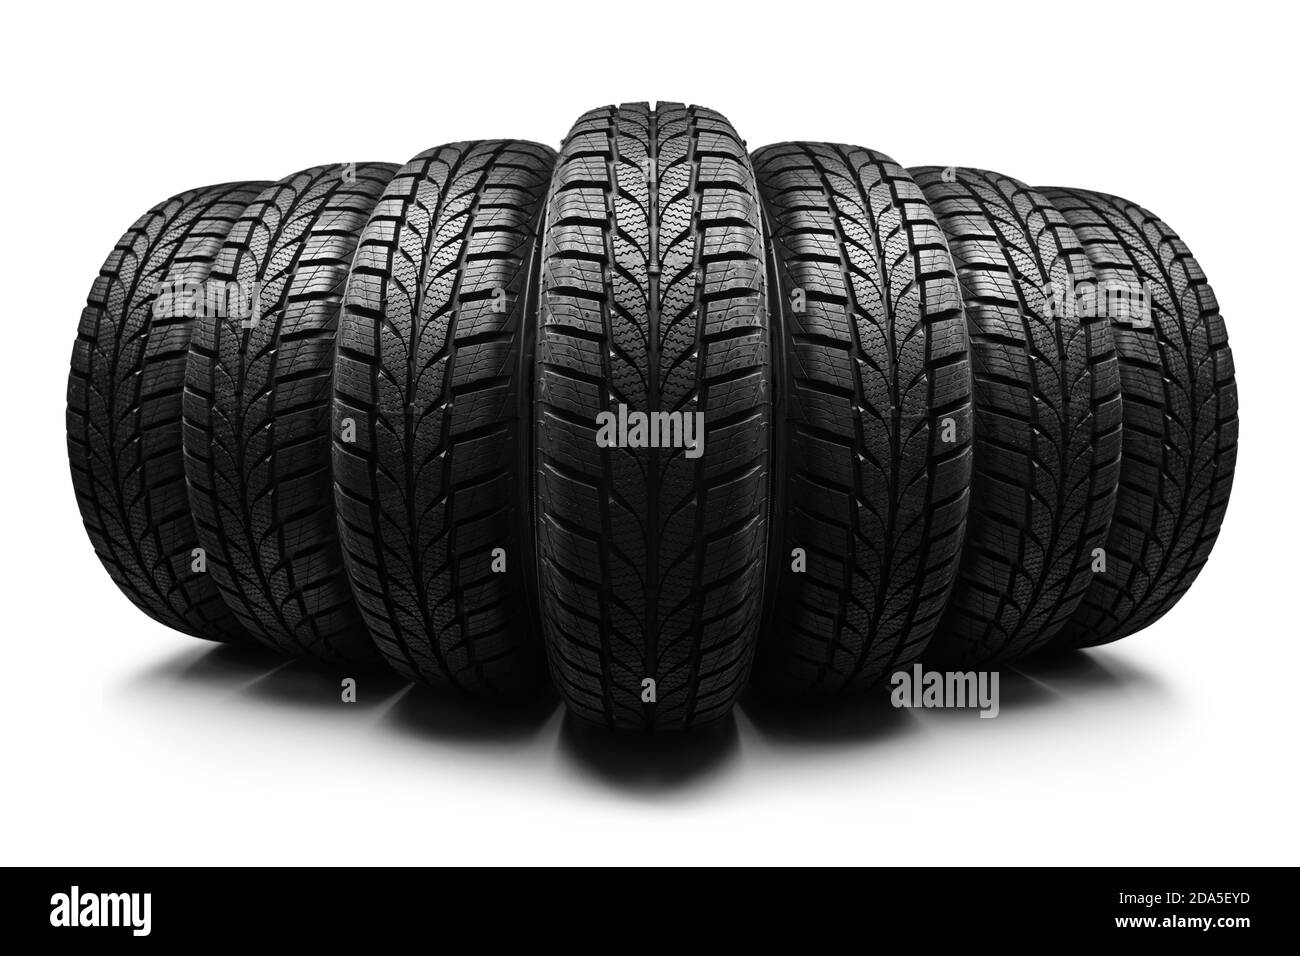 Row of car tires isolated on white background Stock Photo